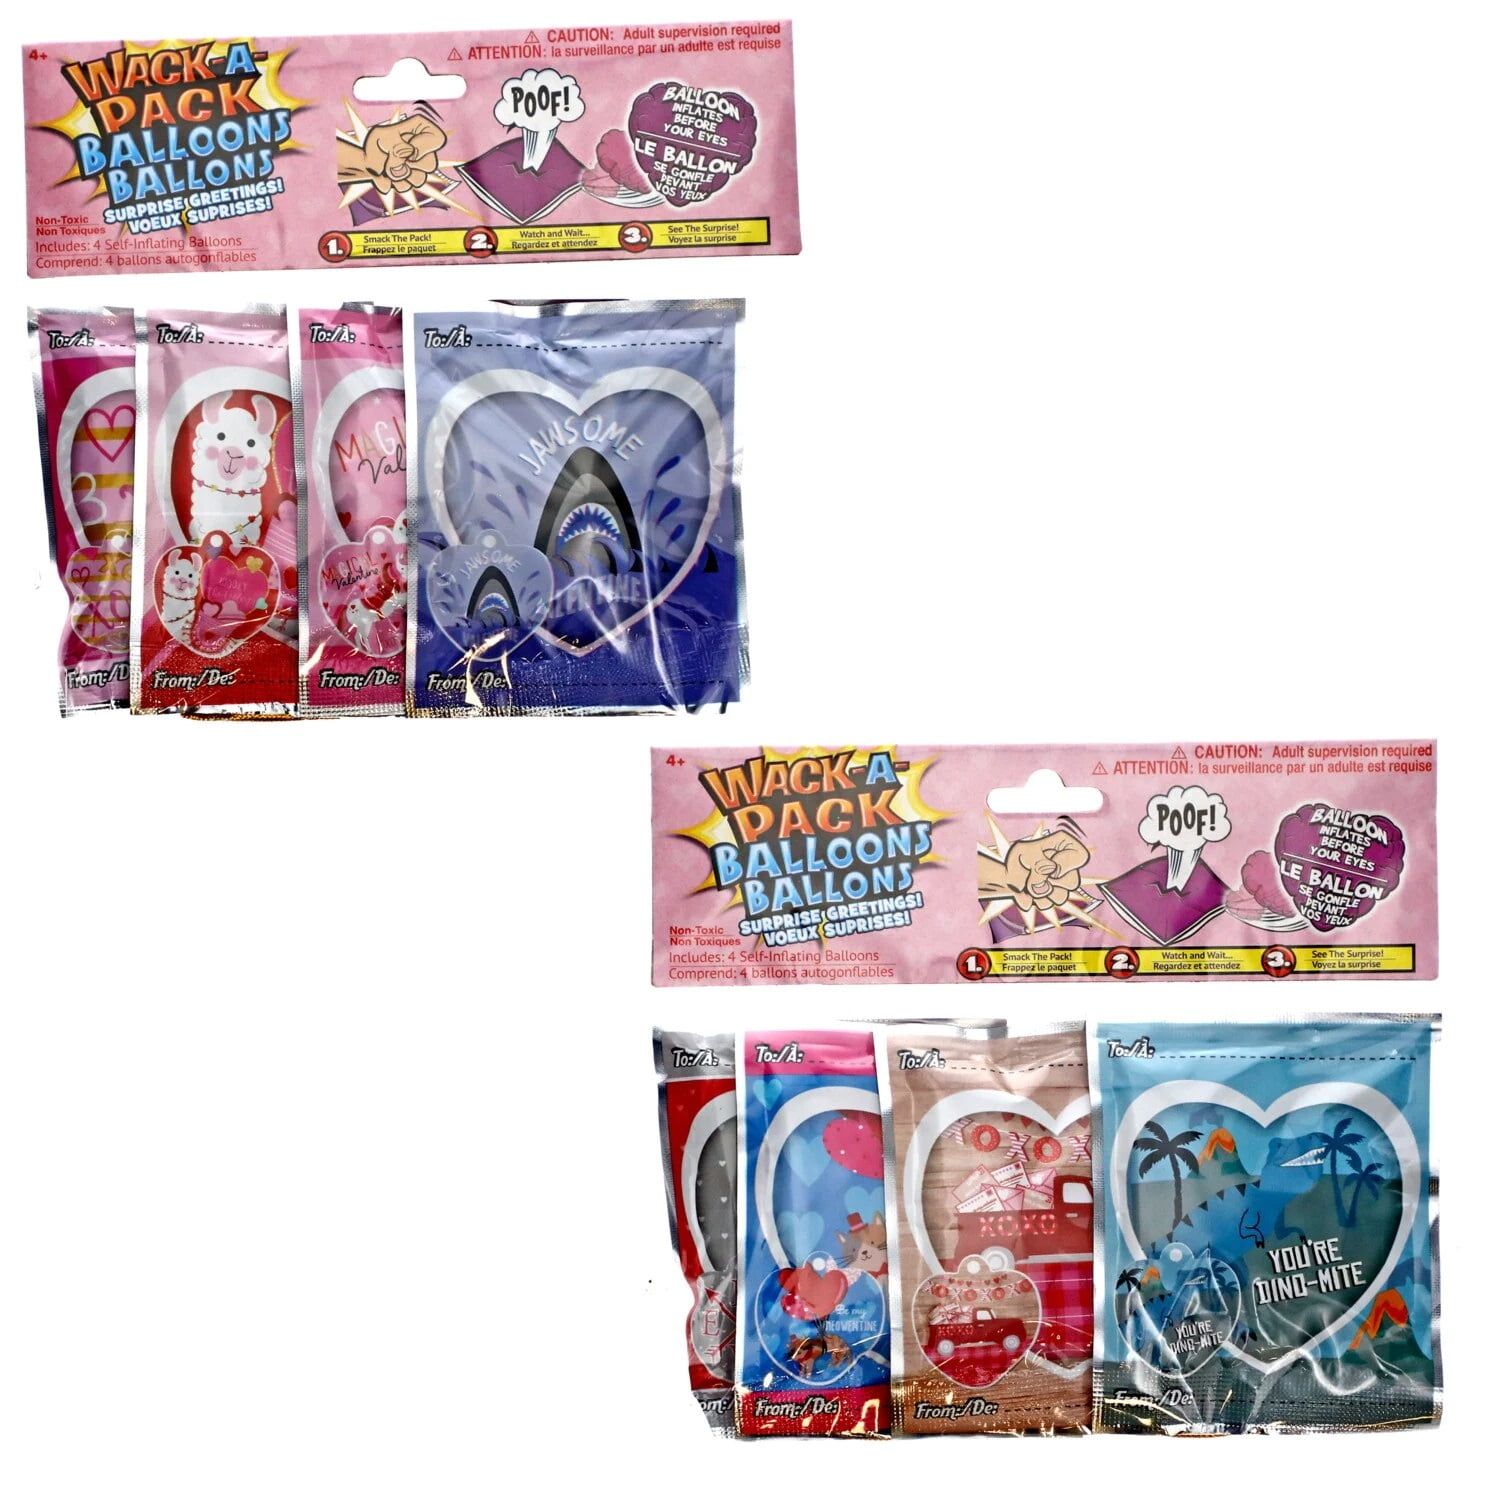 Wack-A-Pack Self-Inflating Easter Balloon 4-Pack Only $1 at Dollar Tree